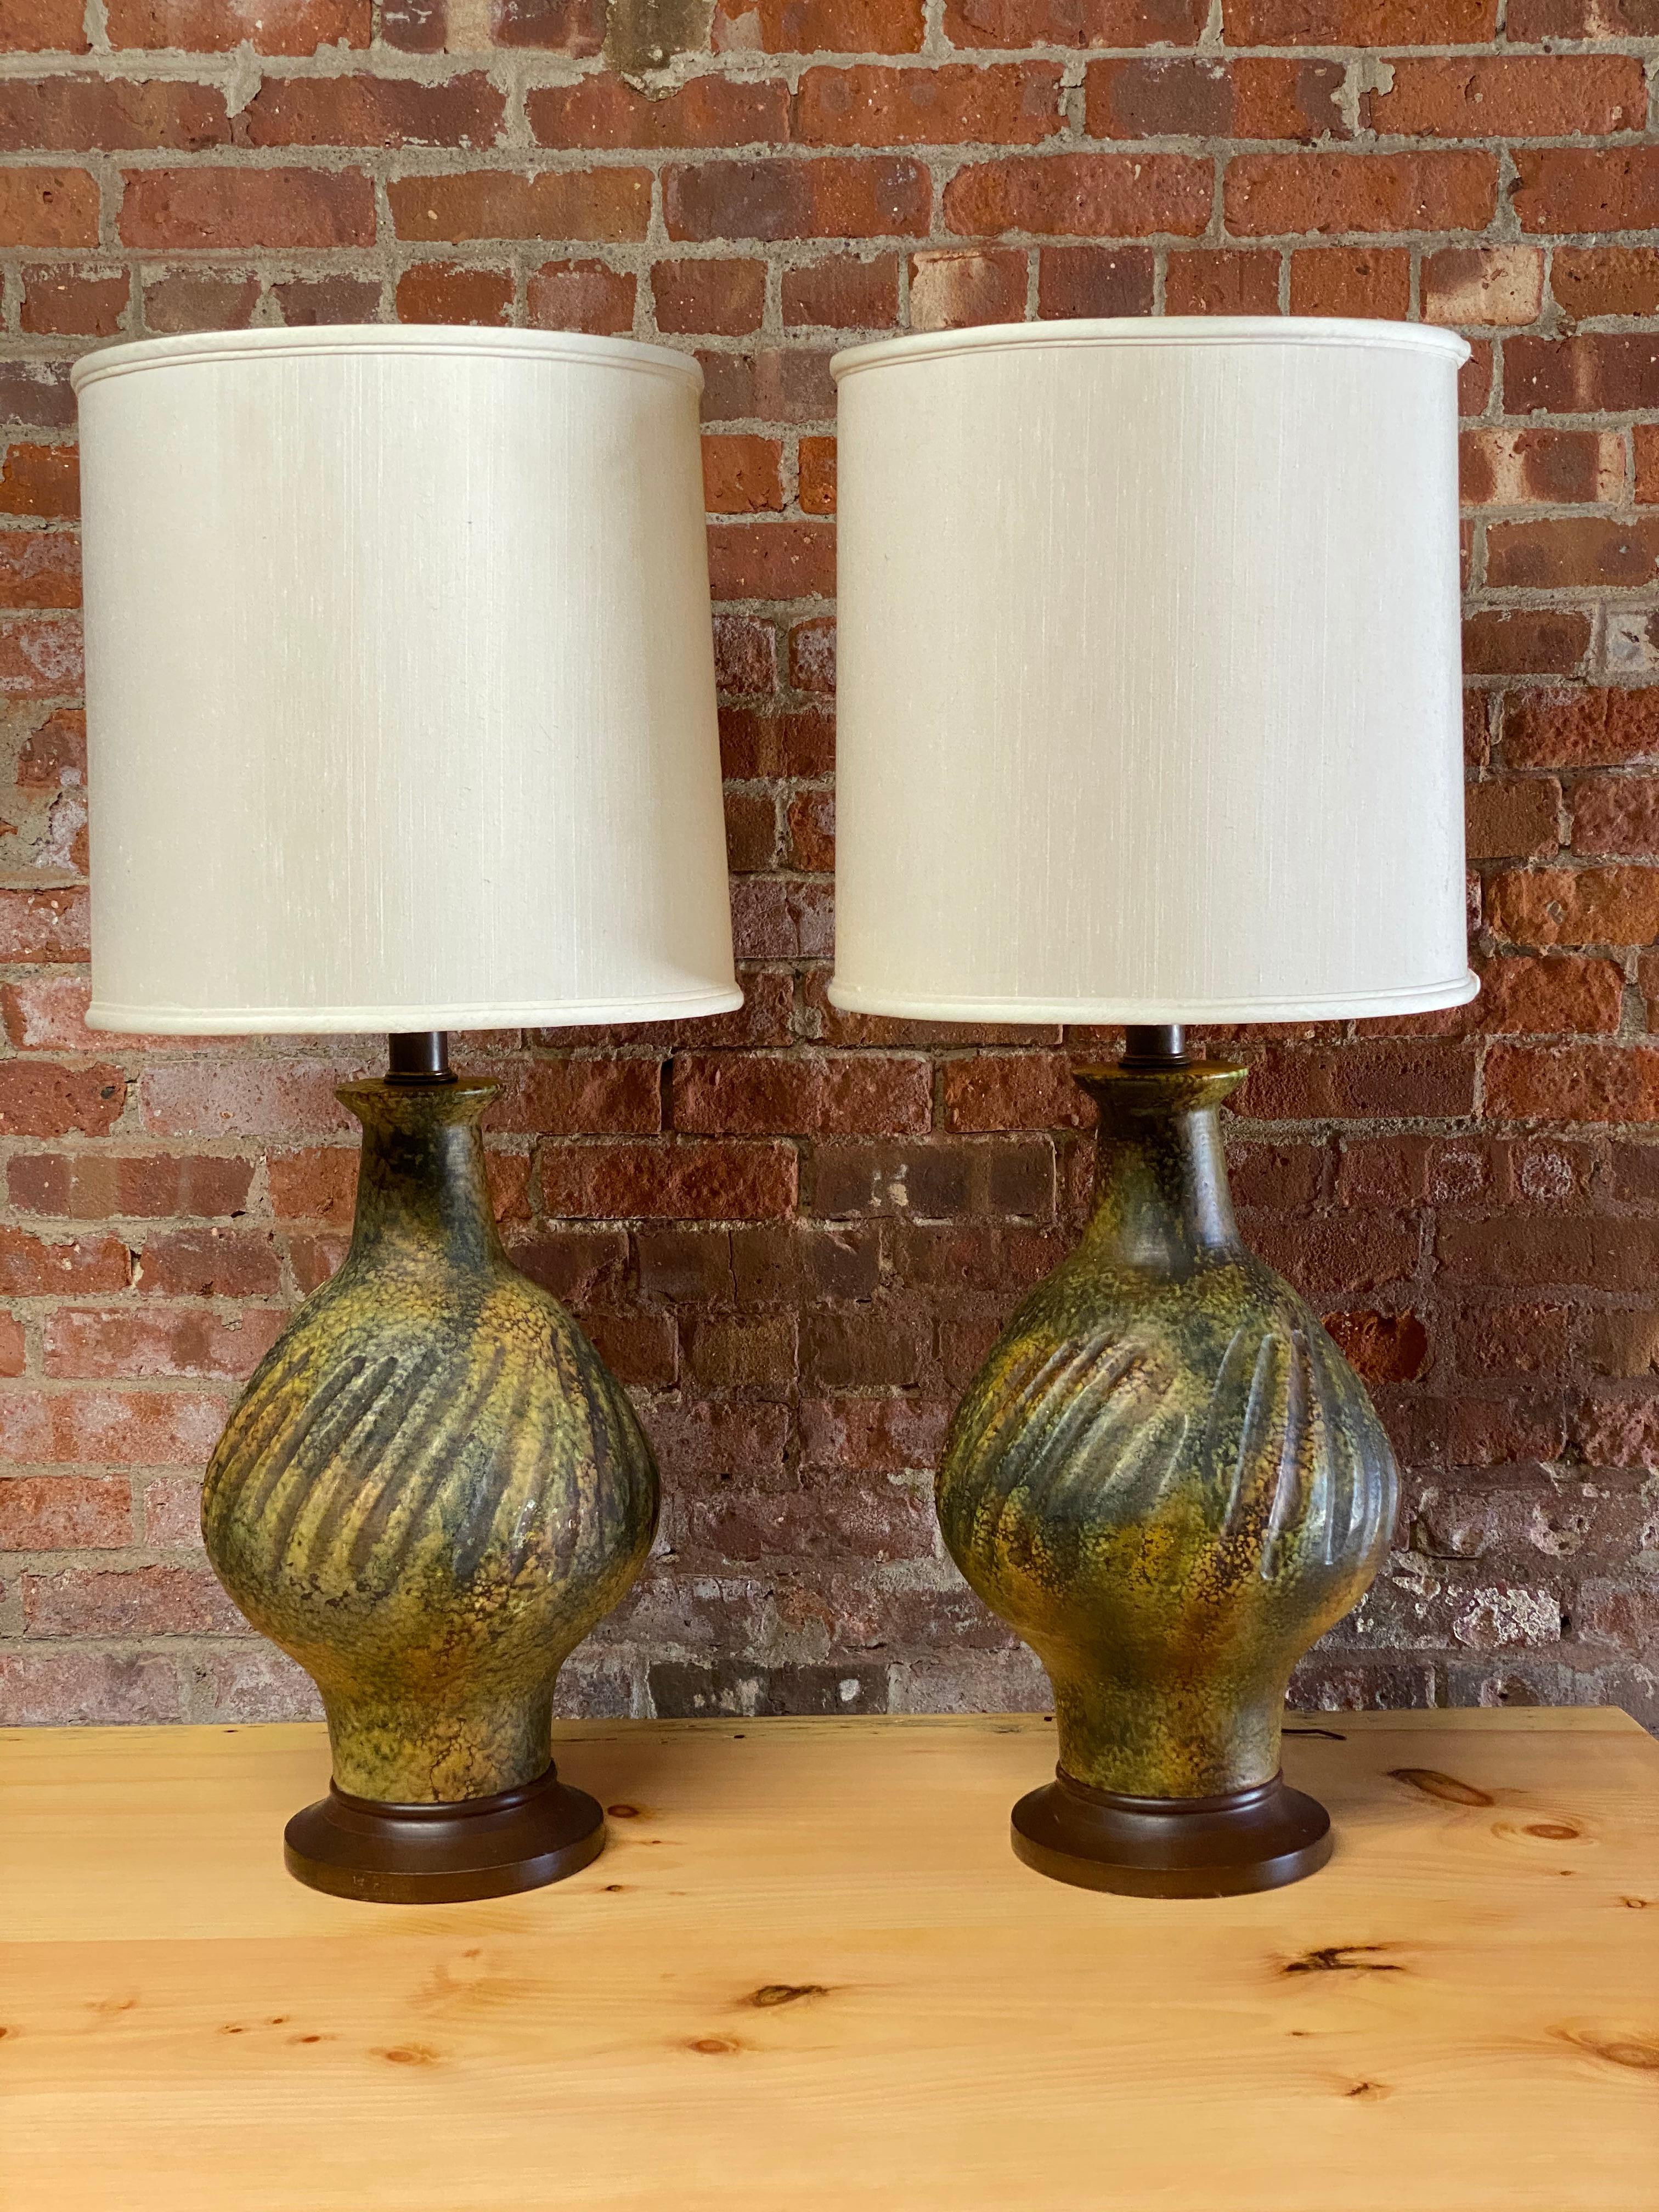 A pair of volcanic ceramic table lamps done in a mottled green/yellow glaze. Cast ceramic bodies with solid wood bases, Circa 1960-70. Very good condition with original wiring.

Shades are for photography purposes only and not included. Harps